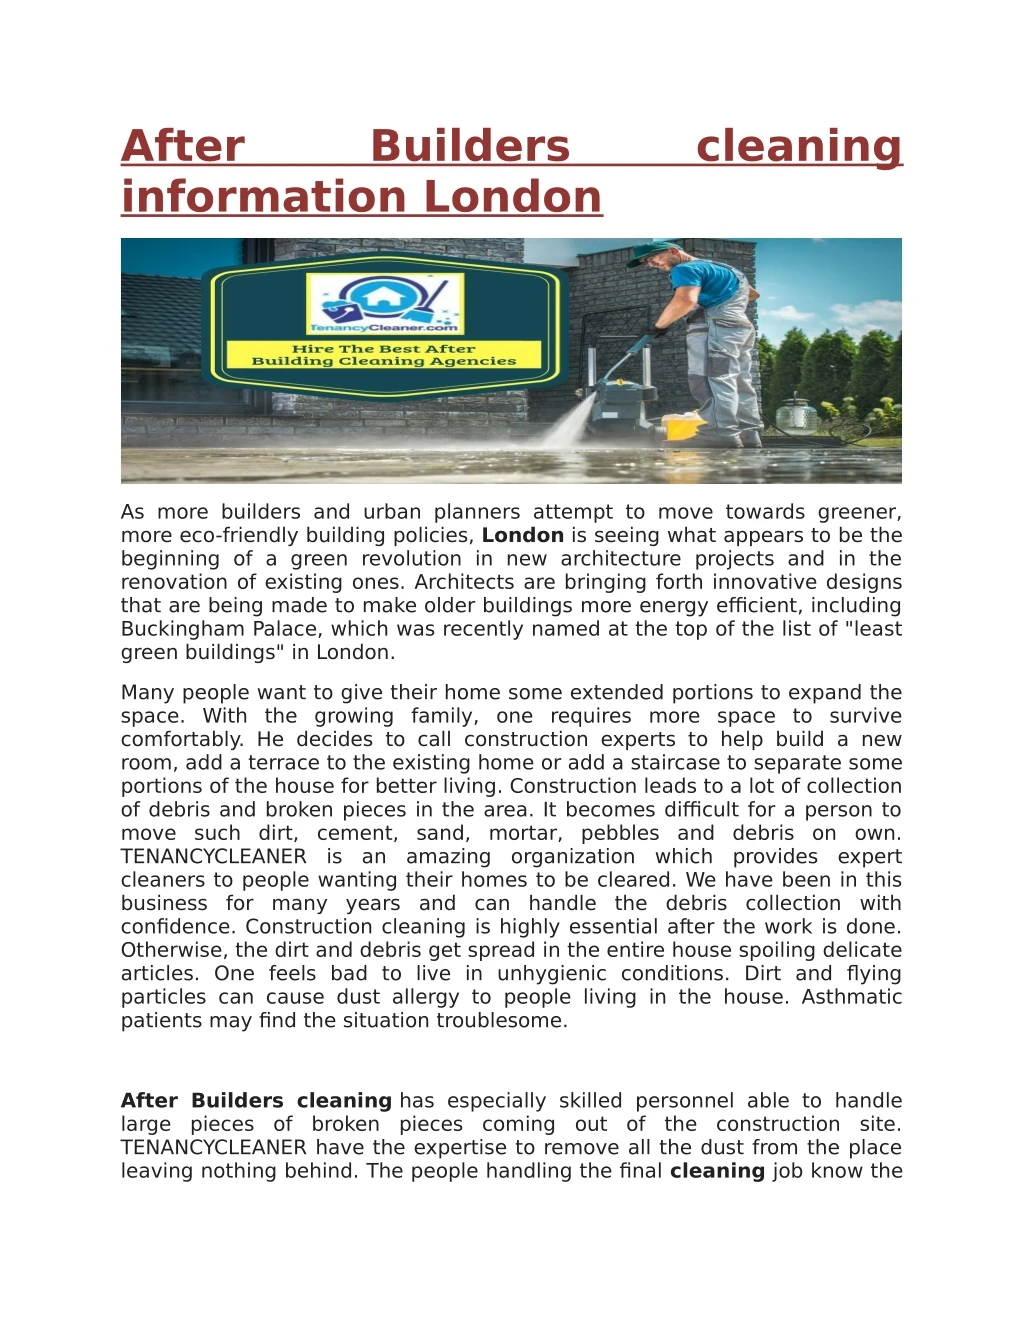 after information london